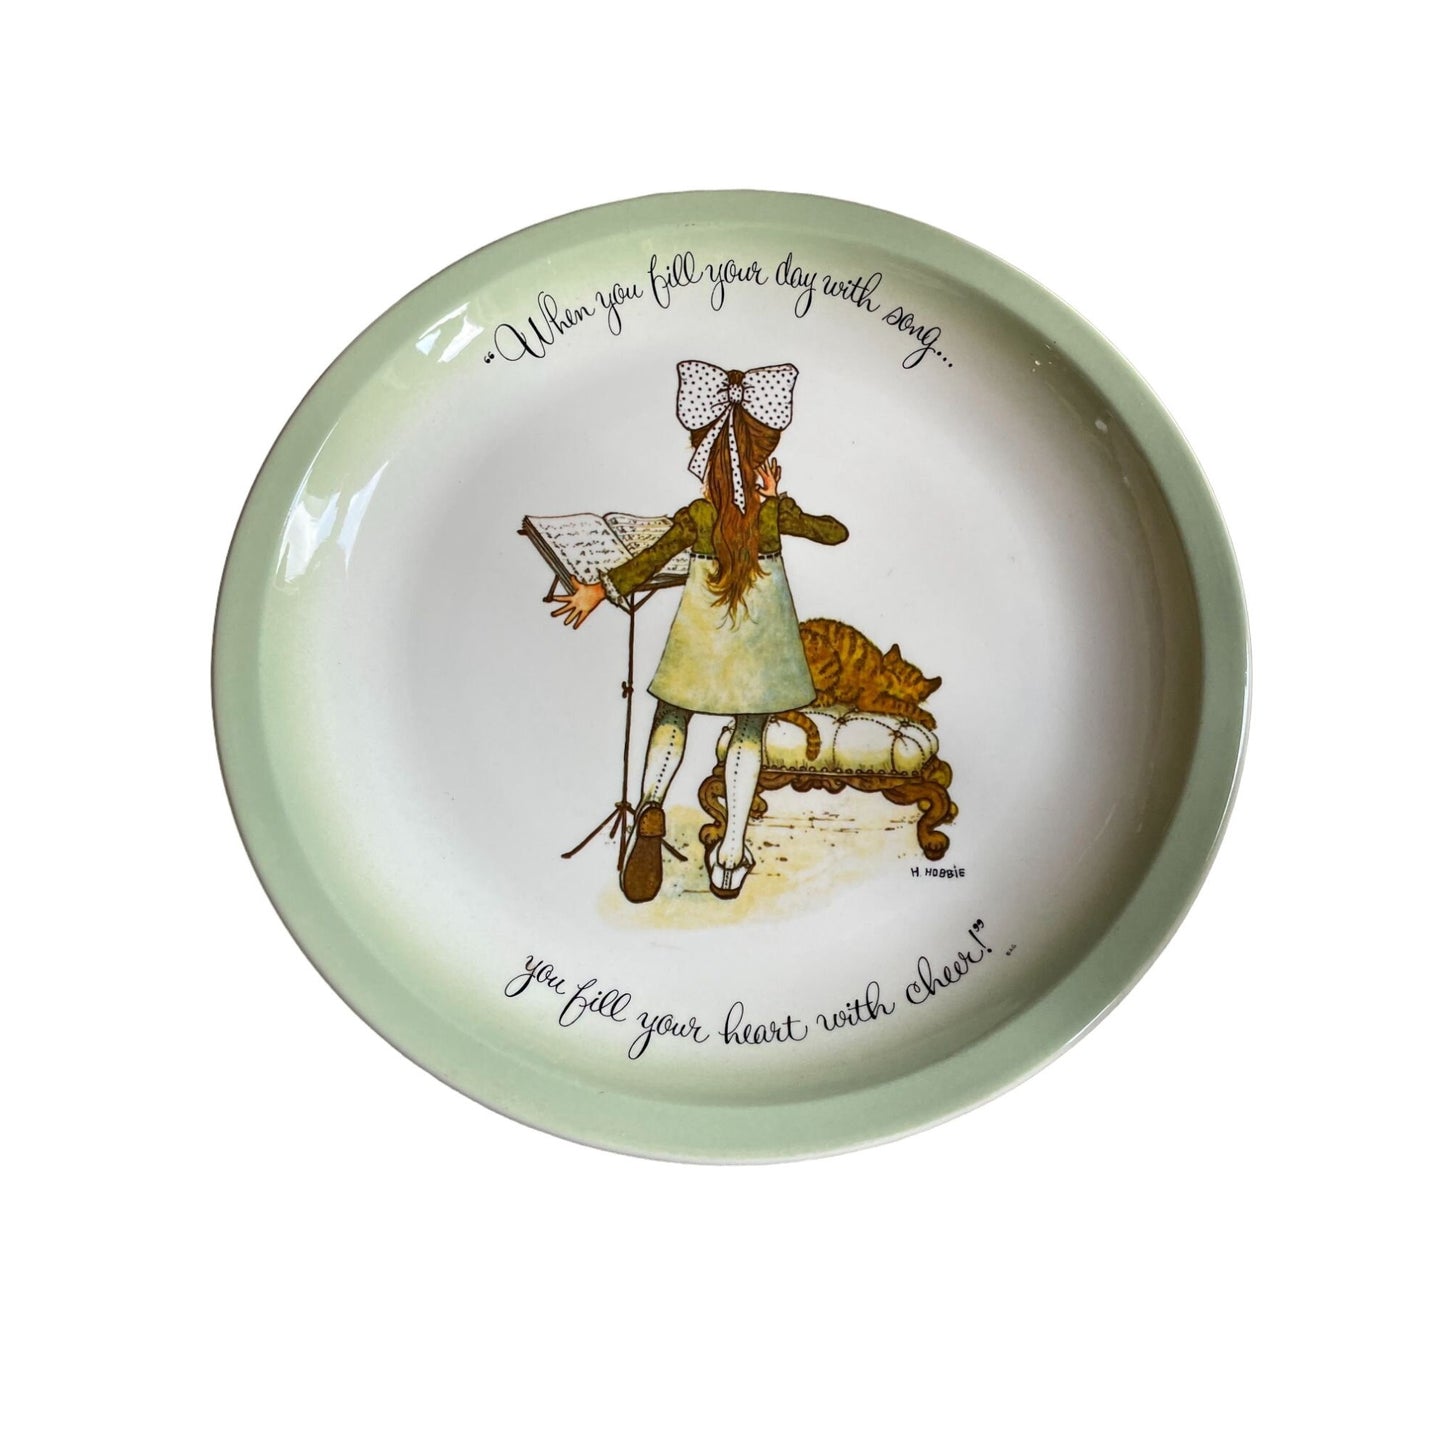 Vintage Holly Hobbie Collectible Plate 1972 When You Fill Your Day With Song..."